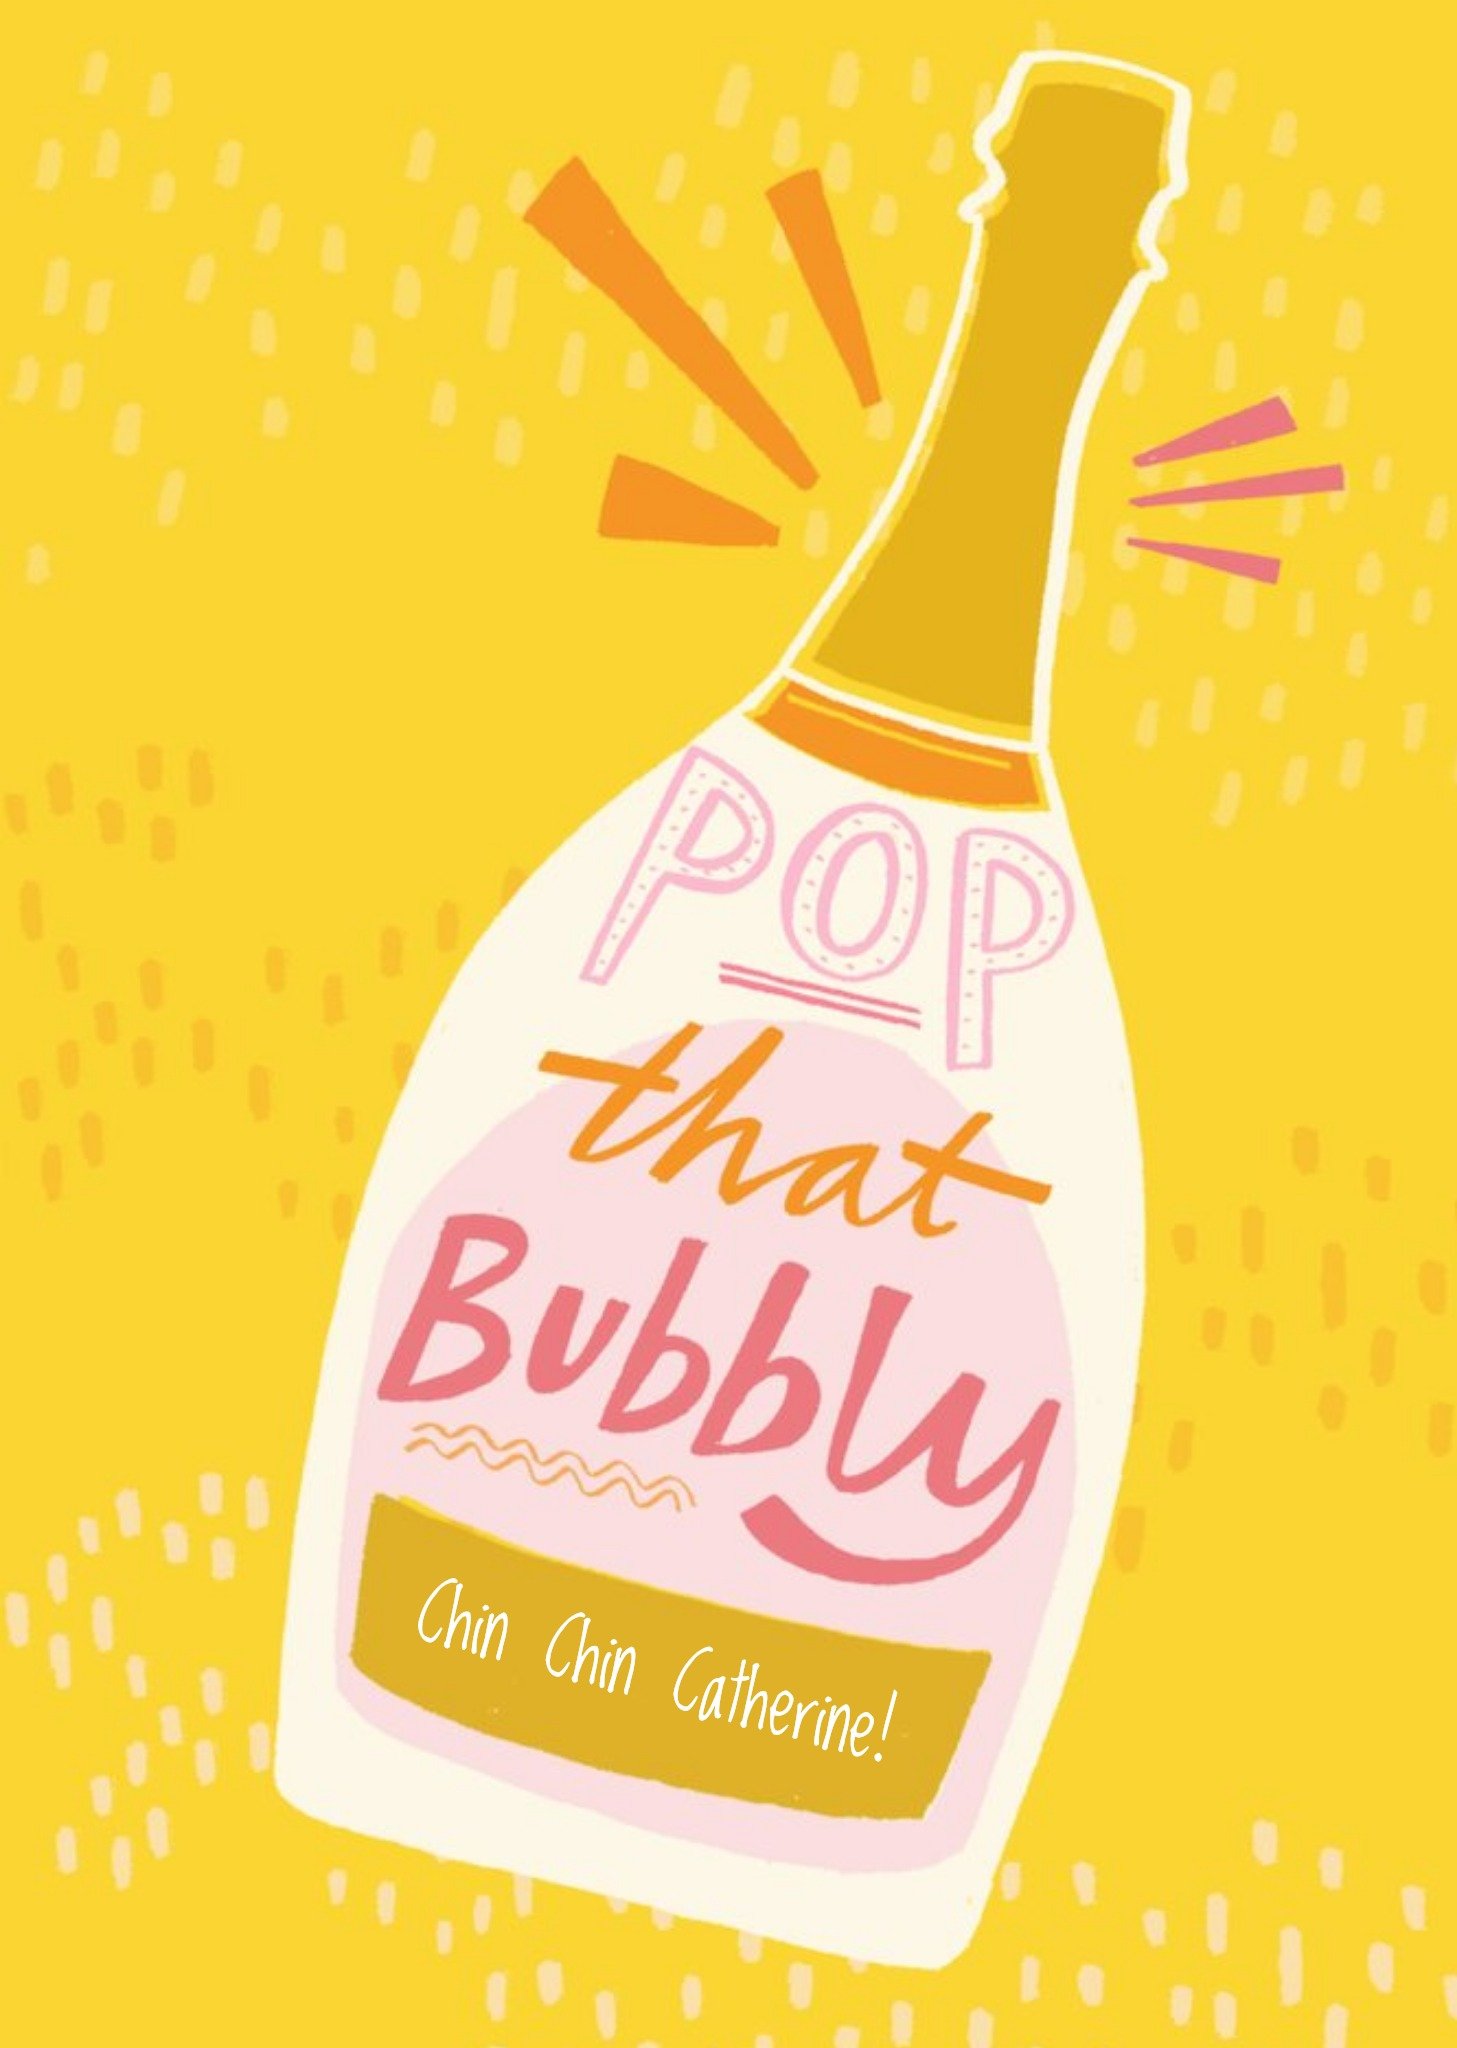 Moonpig Retro Champagne Bottle Pop That Bubbly Birthday Card, Large